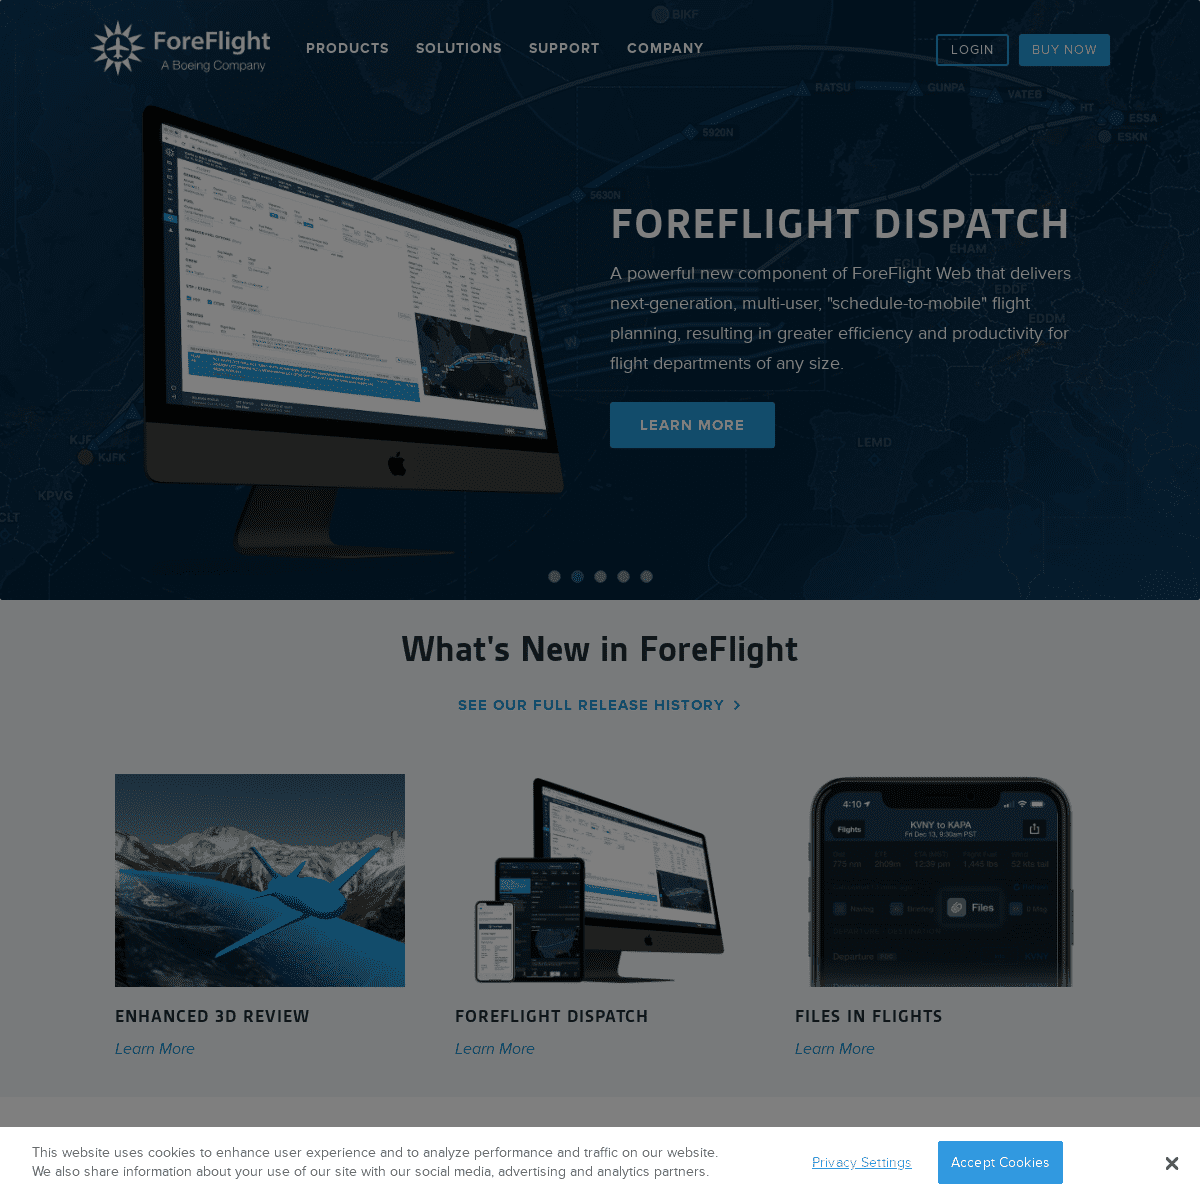 A complete backup of foreflight.com